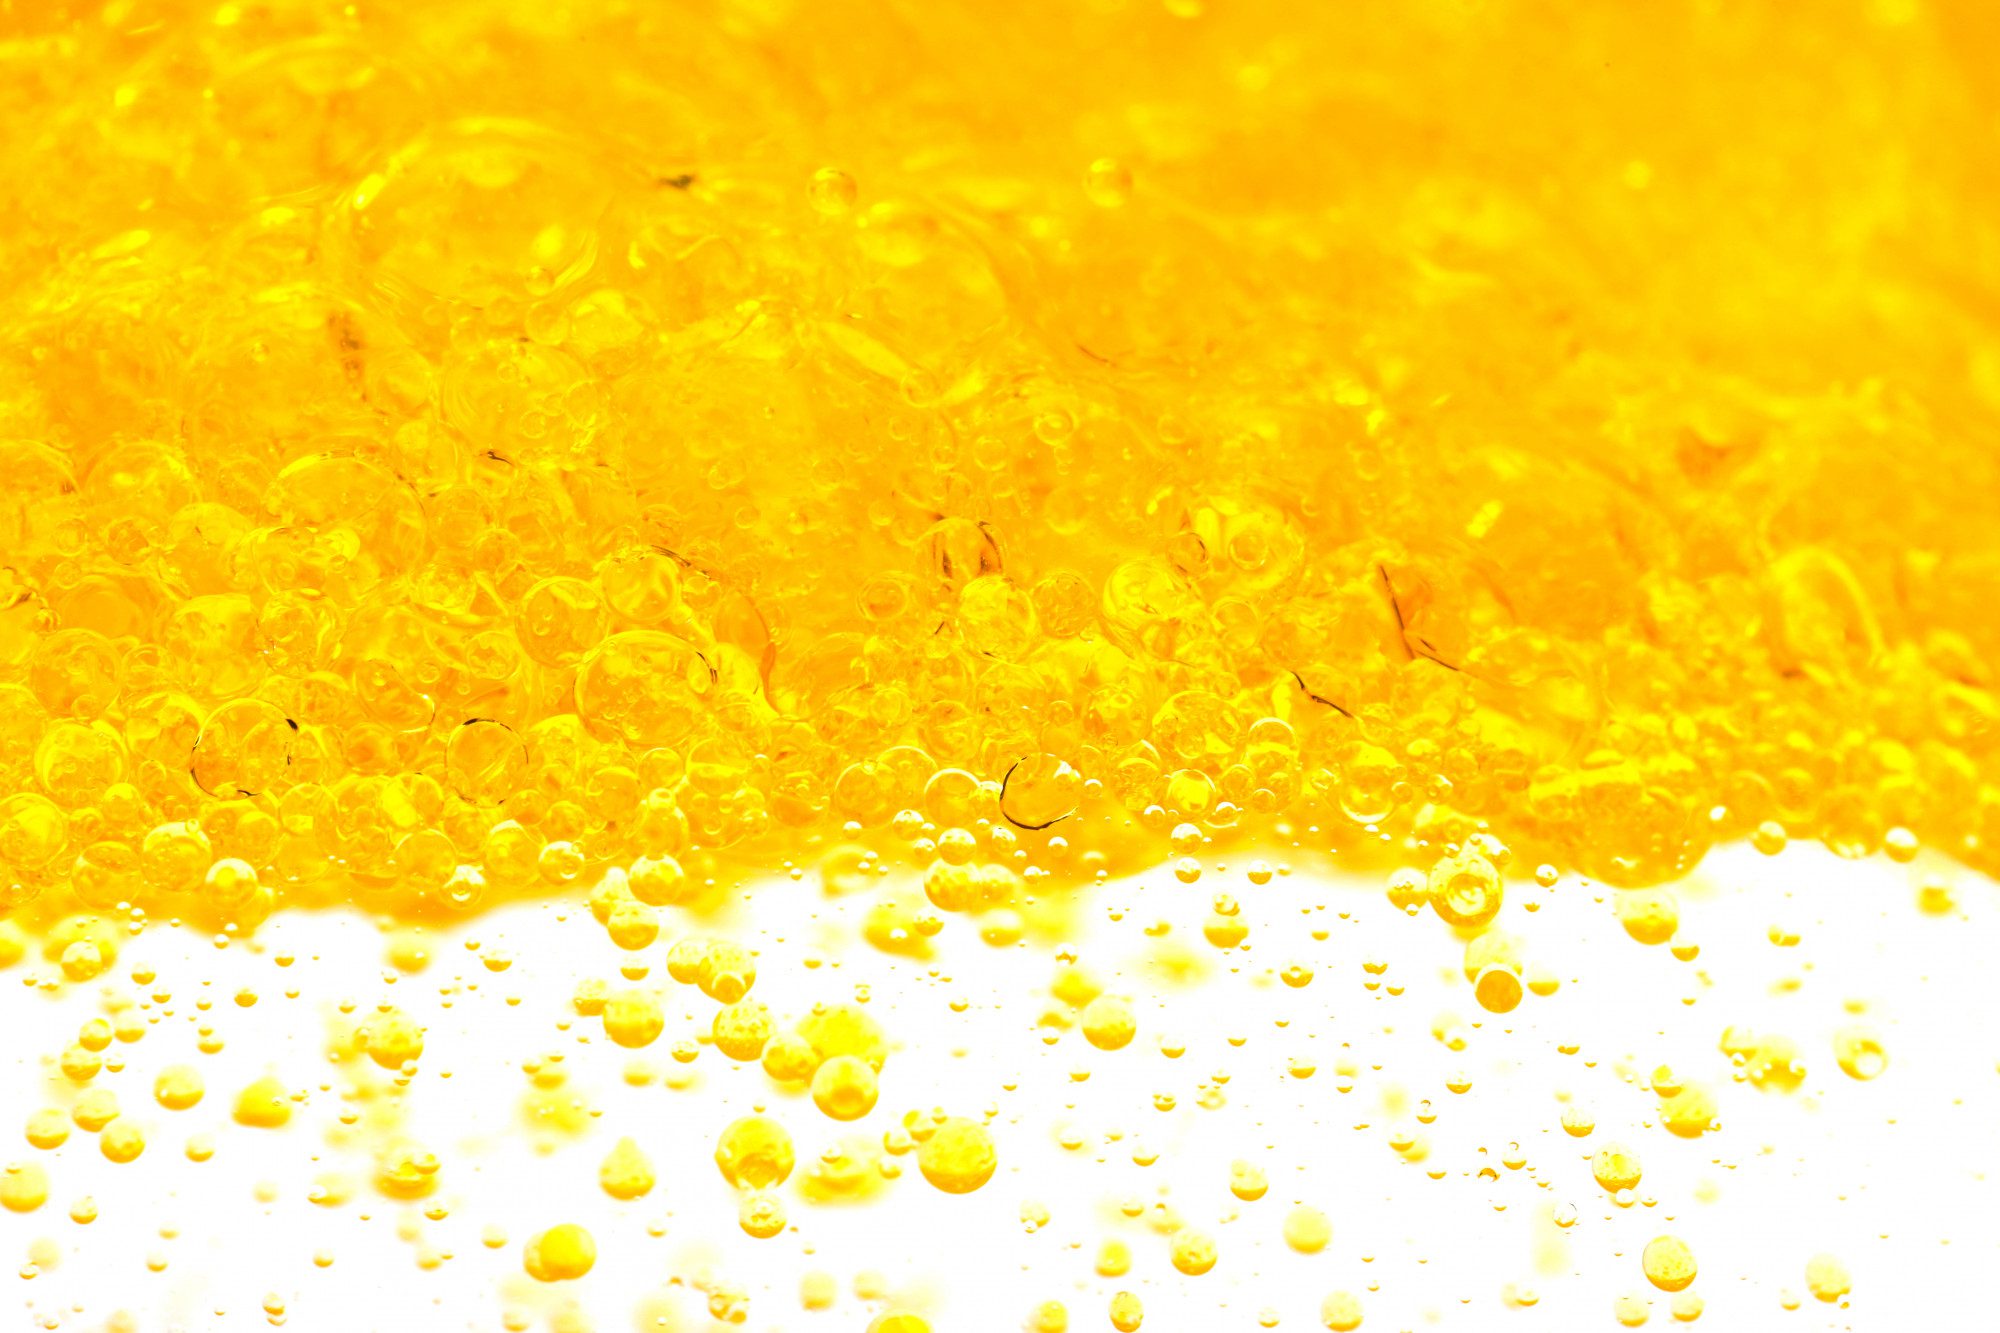 Oil bubbles indicating the need for quality fryer oil management guide adherence.